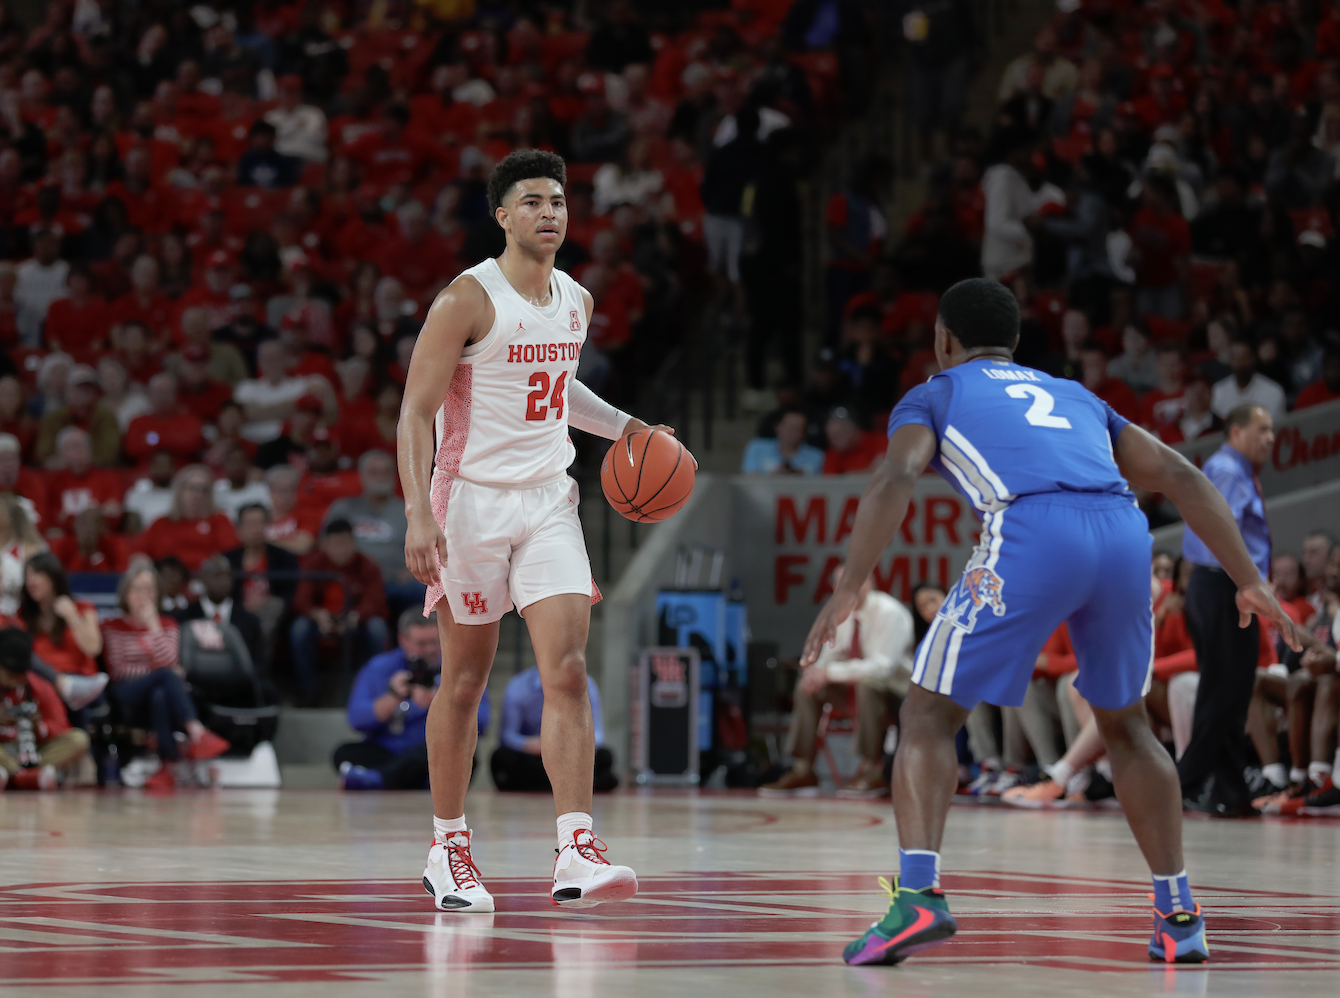 Sophomore guard Quentin Grimes scored 15 of his 17 points in the second half, leading the way for the Cougars in No. 21 Houston's 64-57 win over Memphis on Sunday at Fertitta Center. | Mikol Kindle Jr./The Cougar